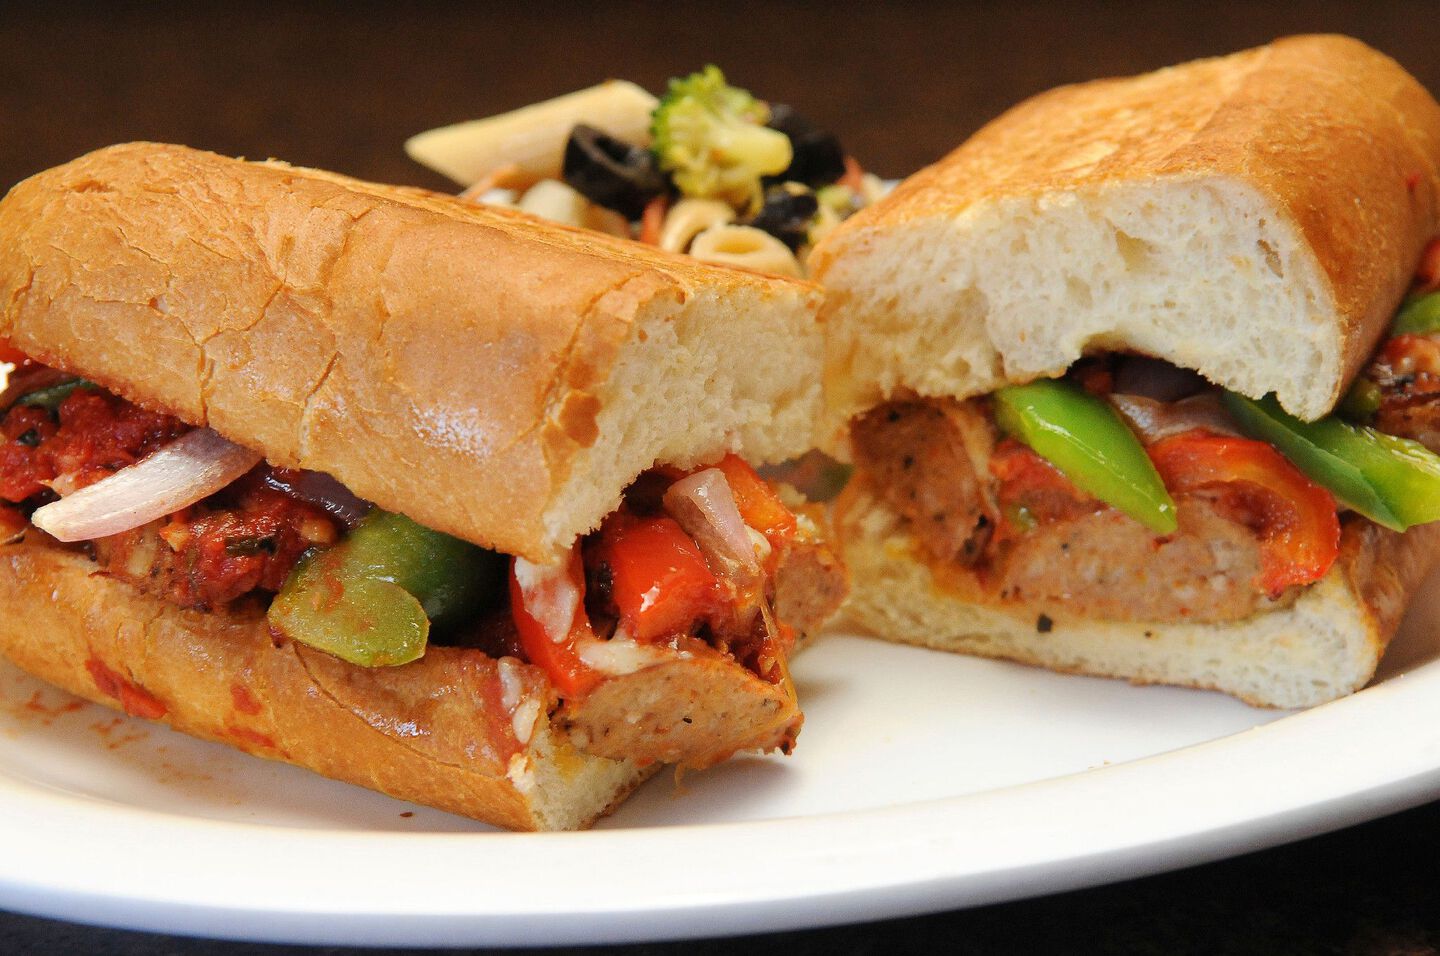 Dutch Oven Sausage and Peppers Sandwich